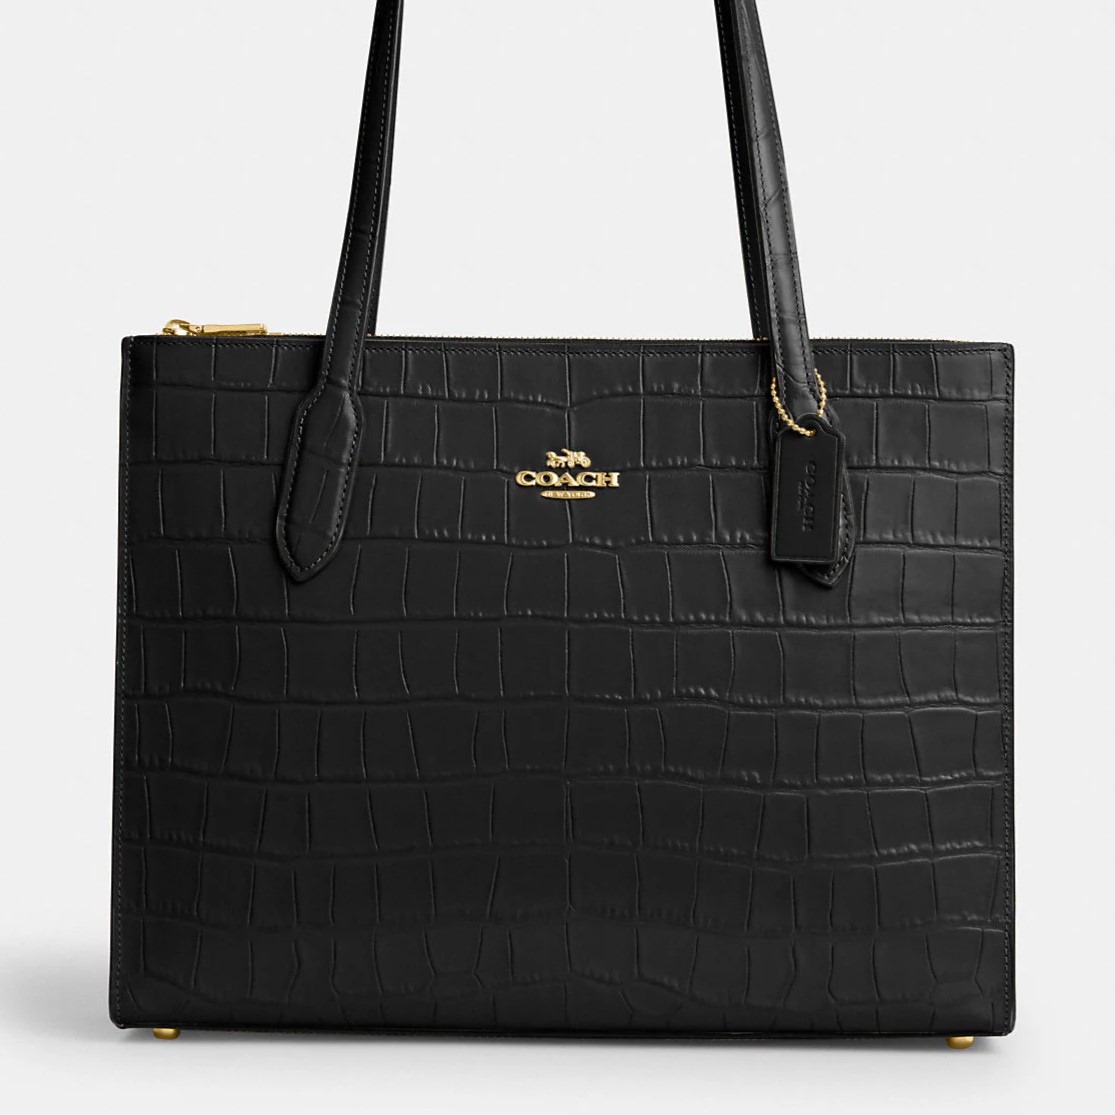 TÚI COACH NỮ NINA TOTE CROCODILE-EMBOSSED LEATHER AND SMOOTH LEATHER BAG IN GOLD BLACK CL654 6